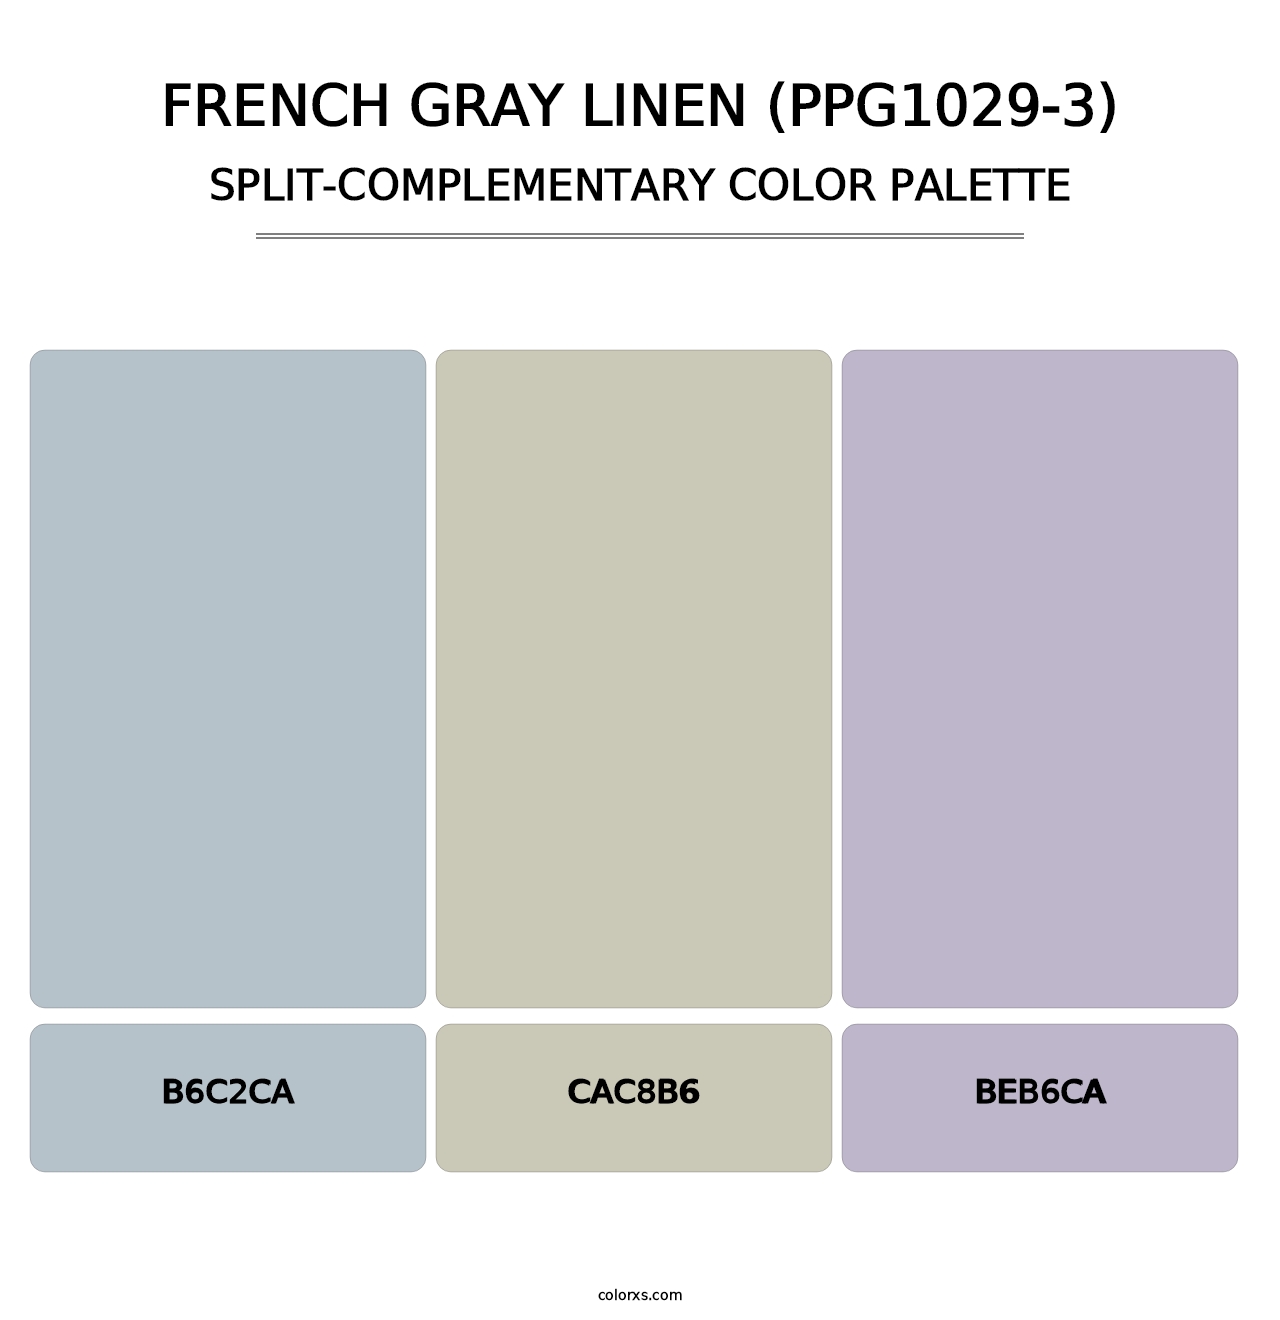 French Gray Linen (PPG1029-3) - Split-Complementary Color Palette